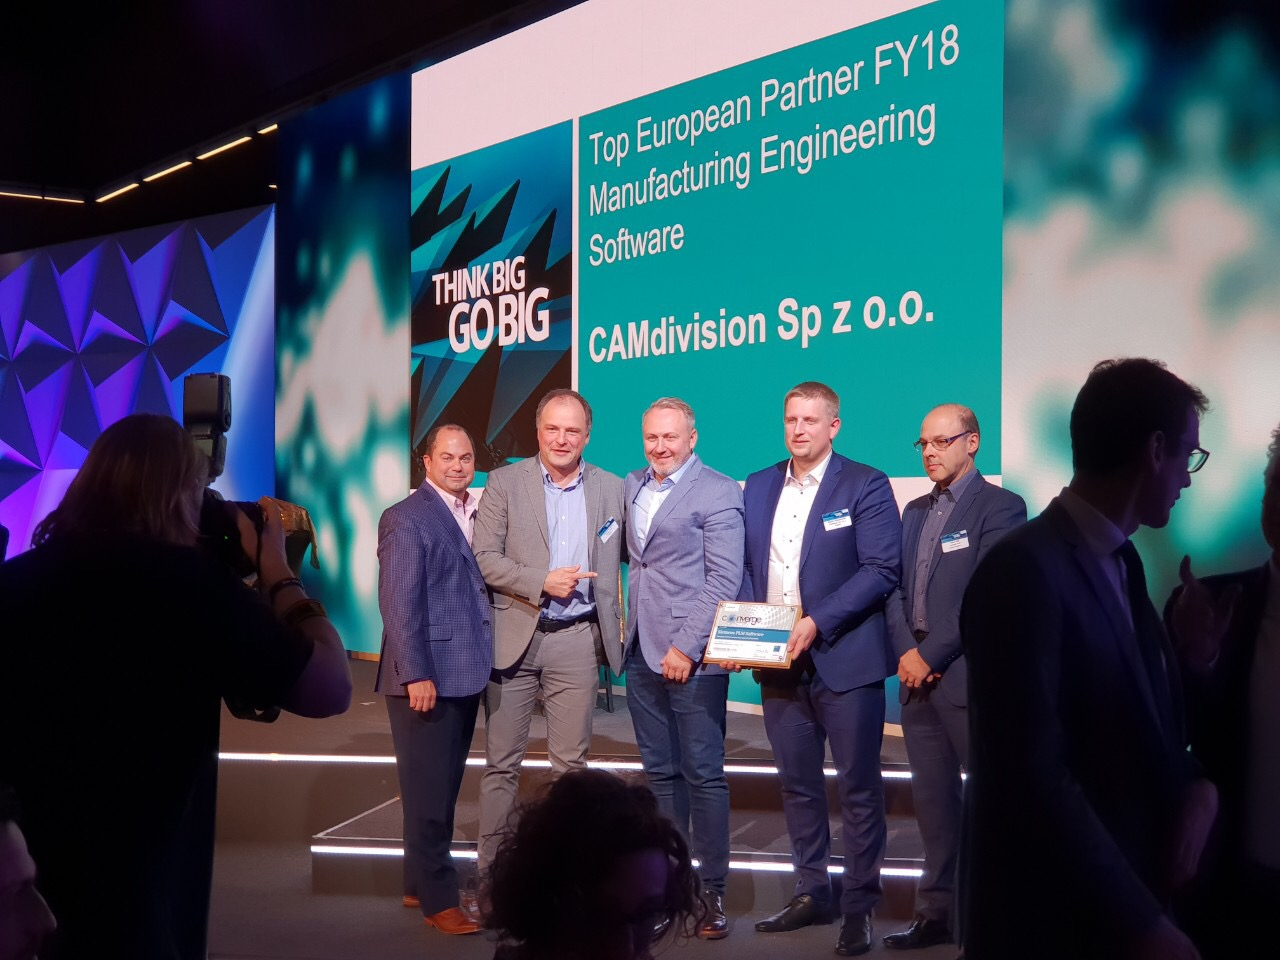 „Top European Partner for Manufacturing Engineering Software FY18”